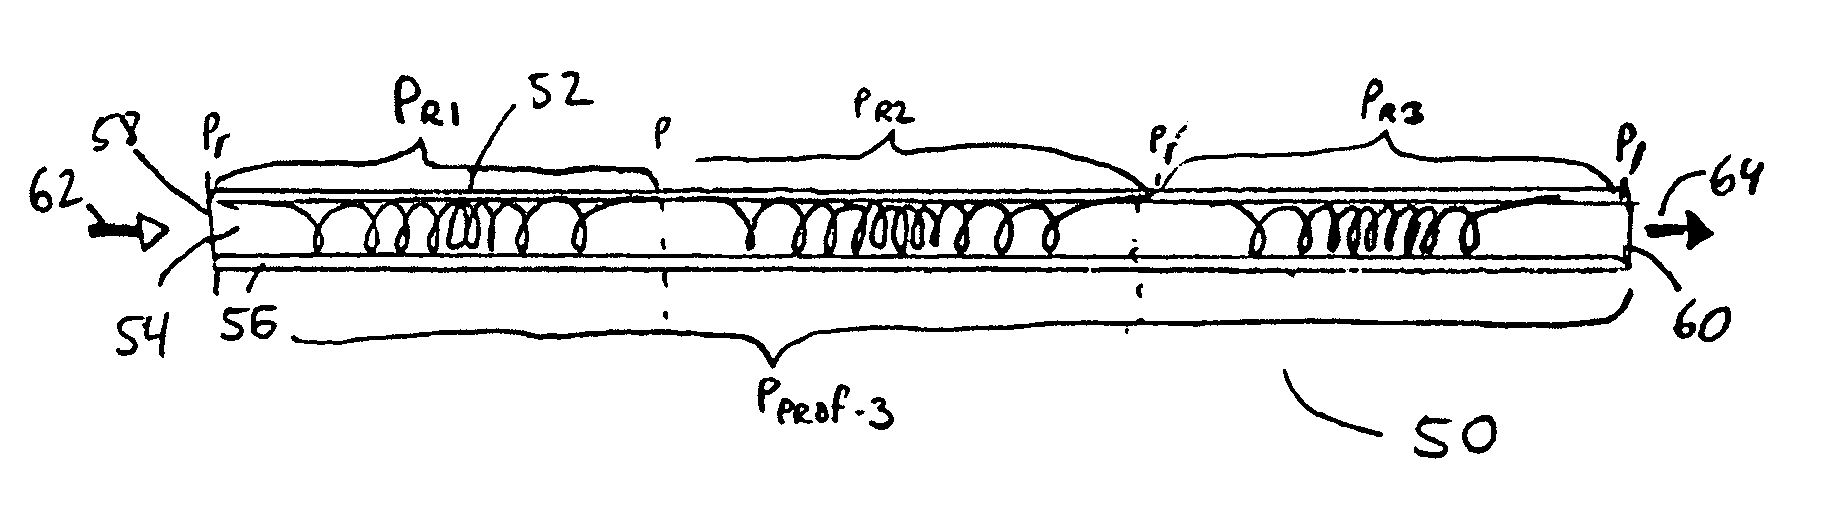 Chiral in-fiber polarizer apparatus and method